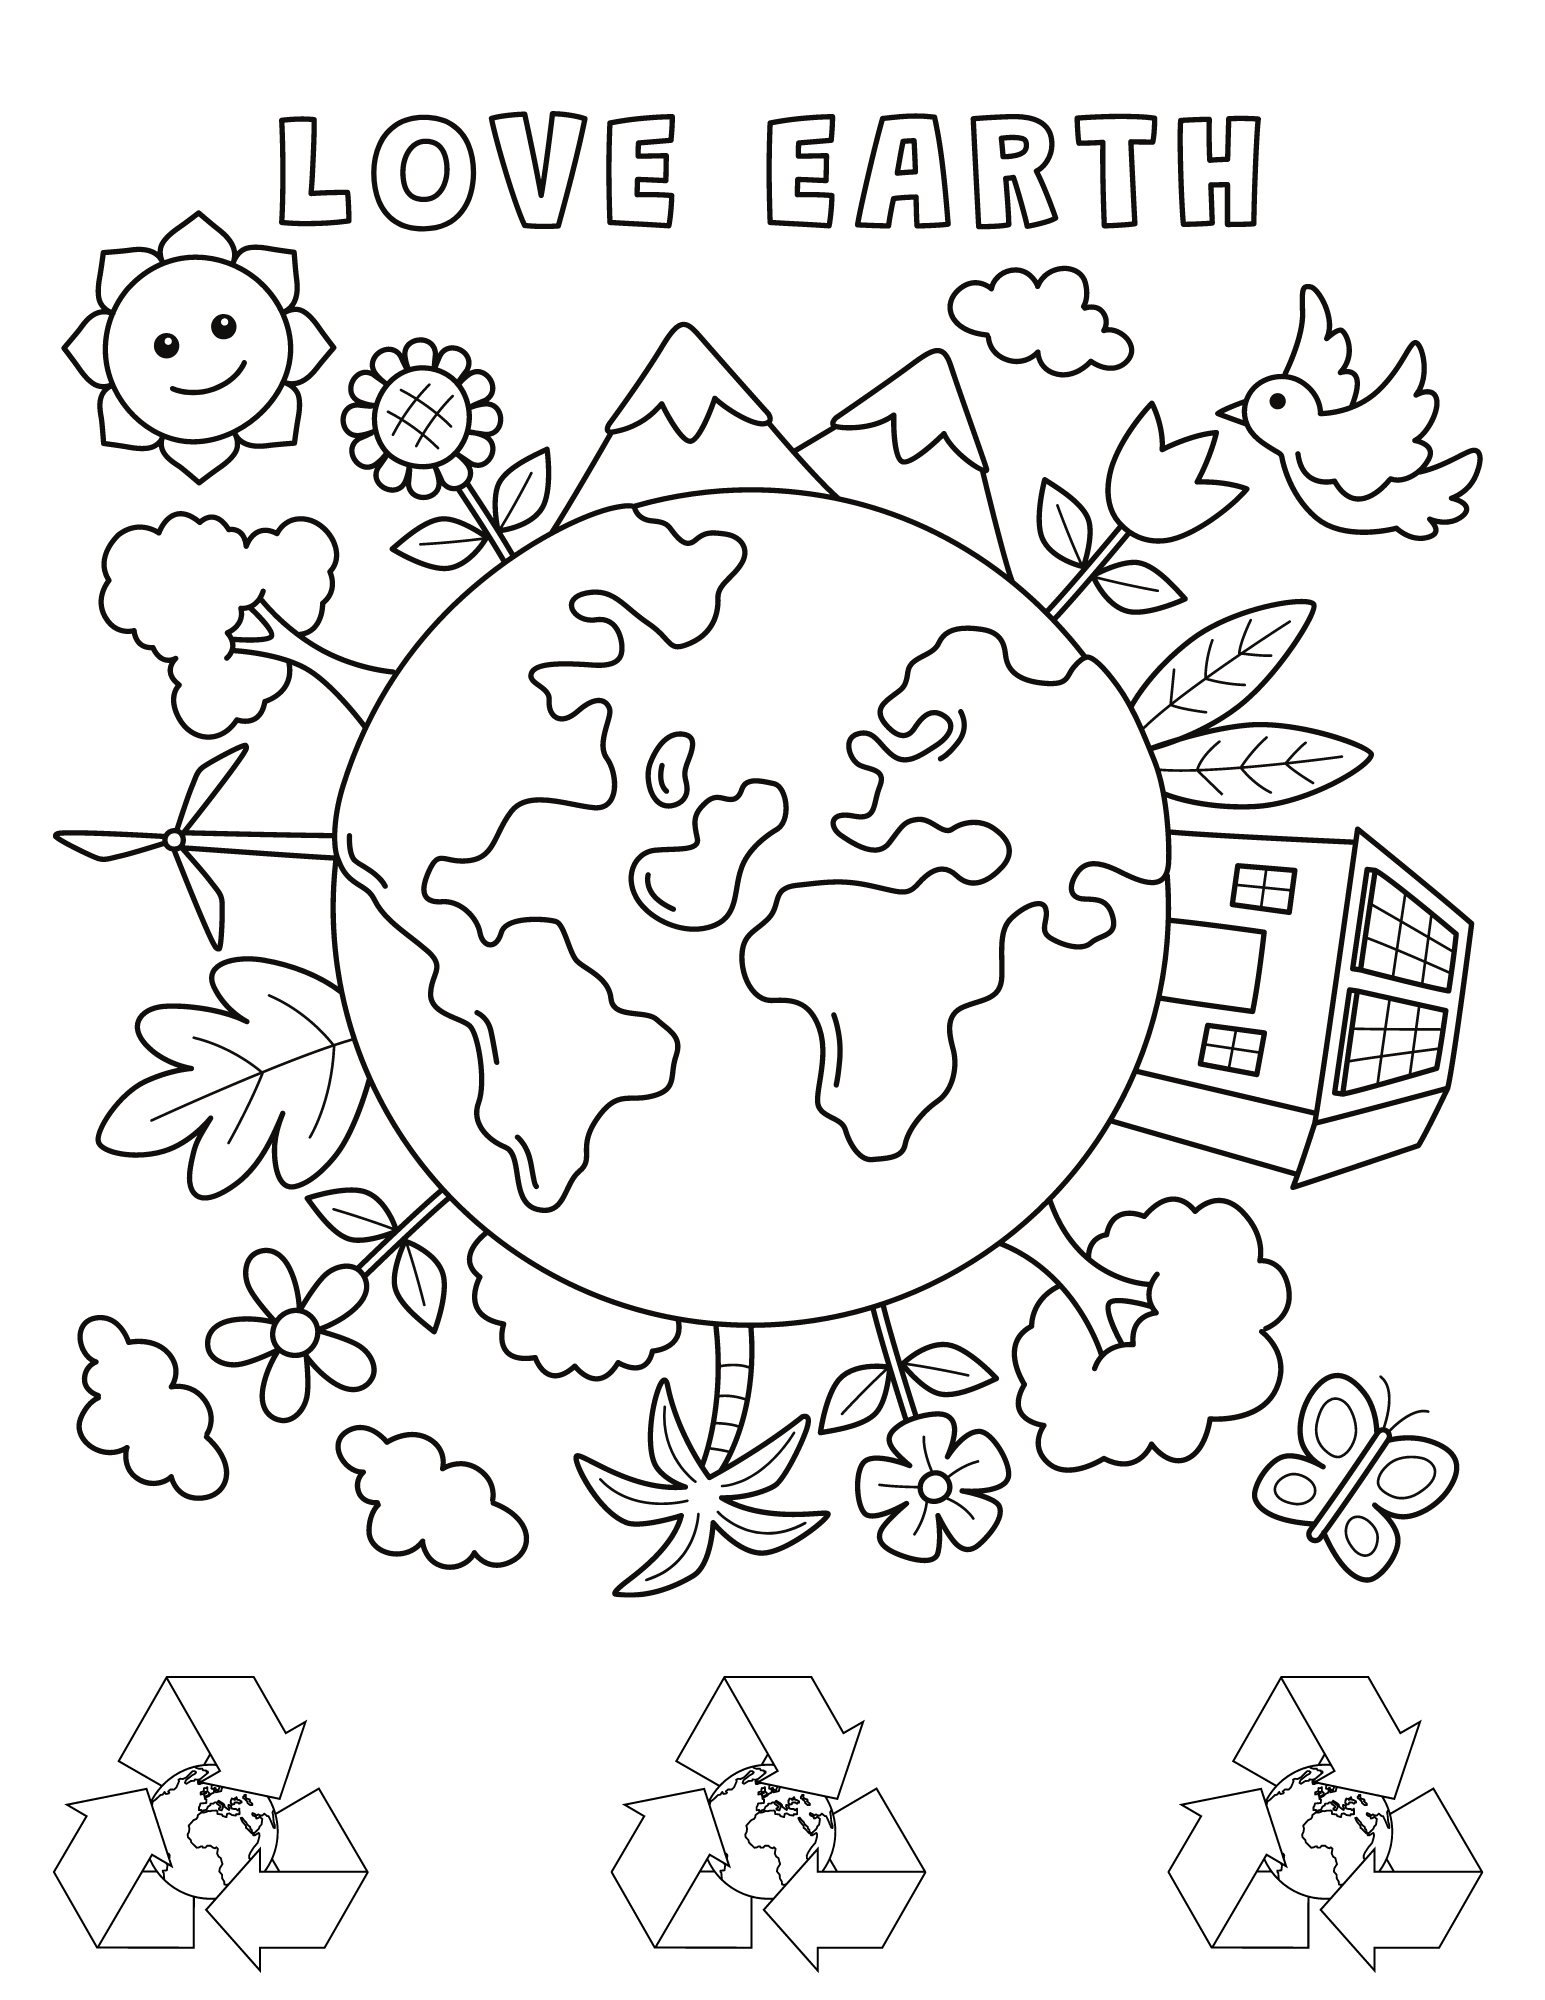 Earth Day Coloring Pages for Kids and Adults